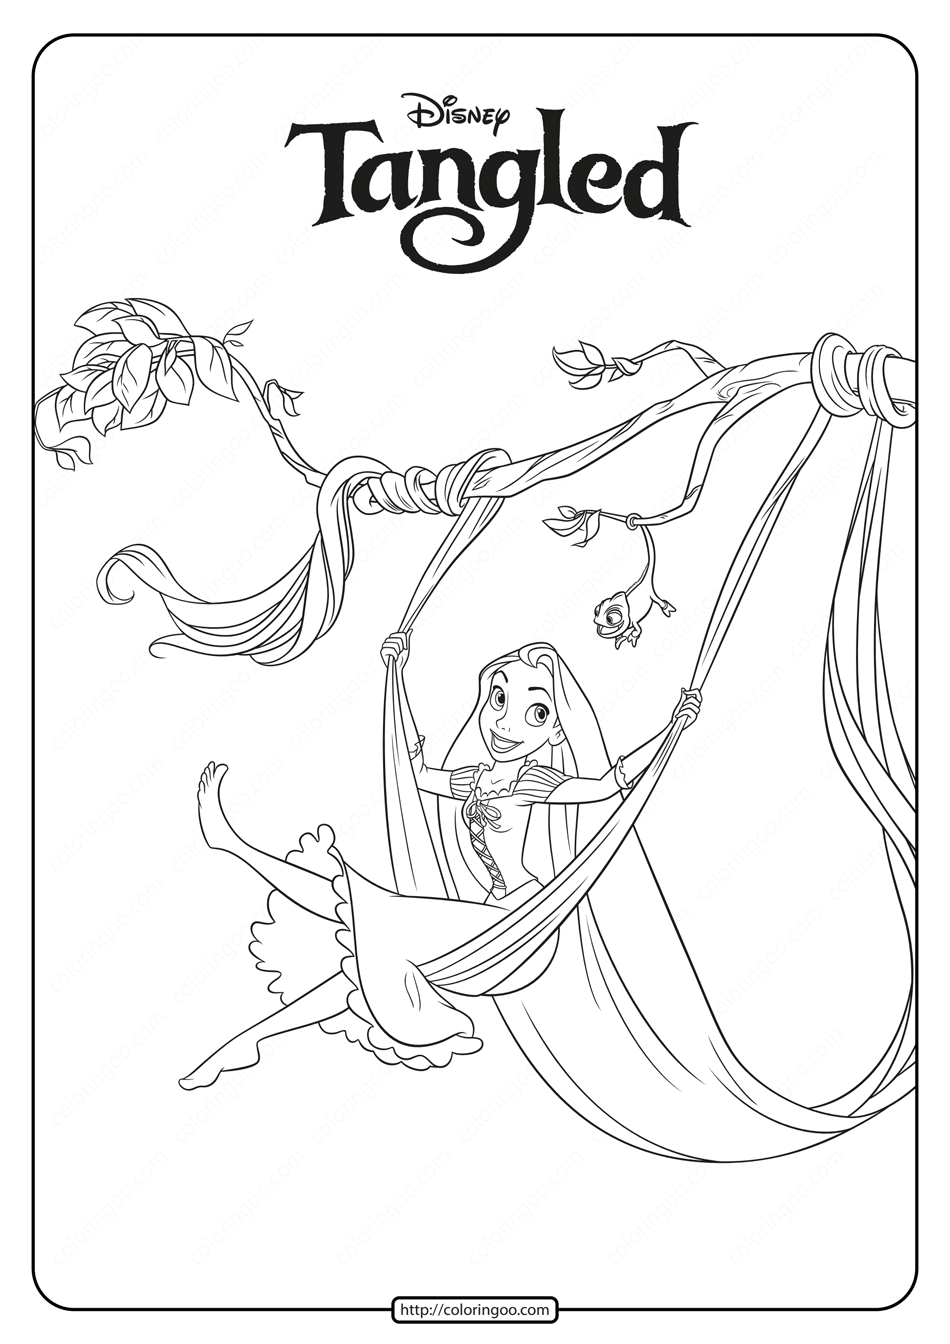 free printable disney tangled coloring pages